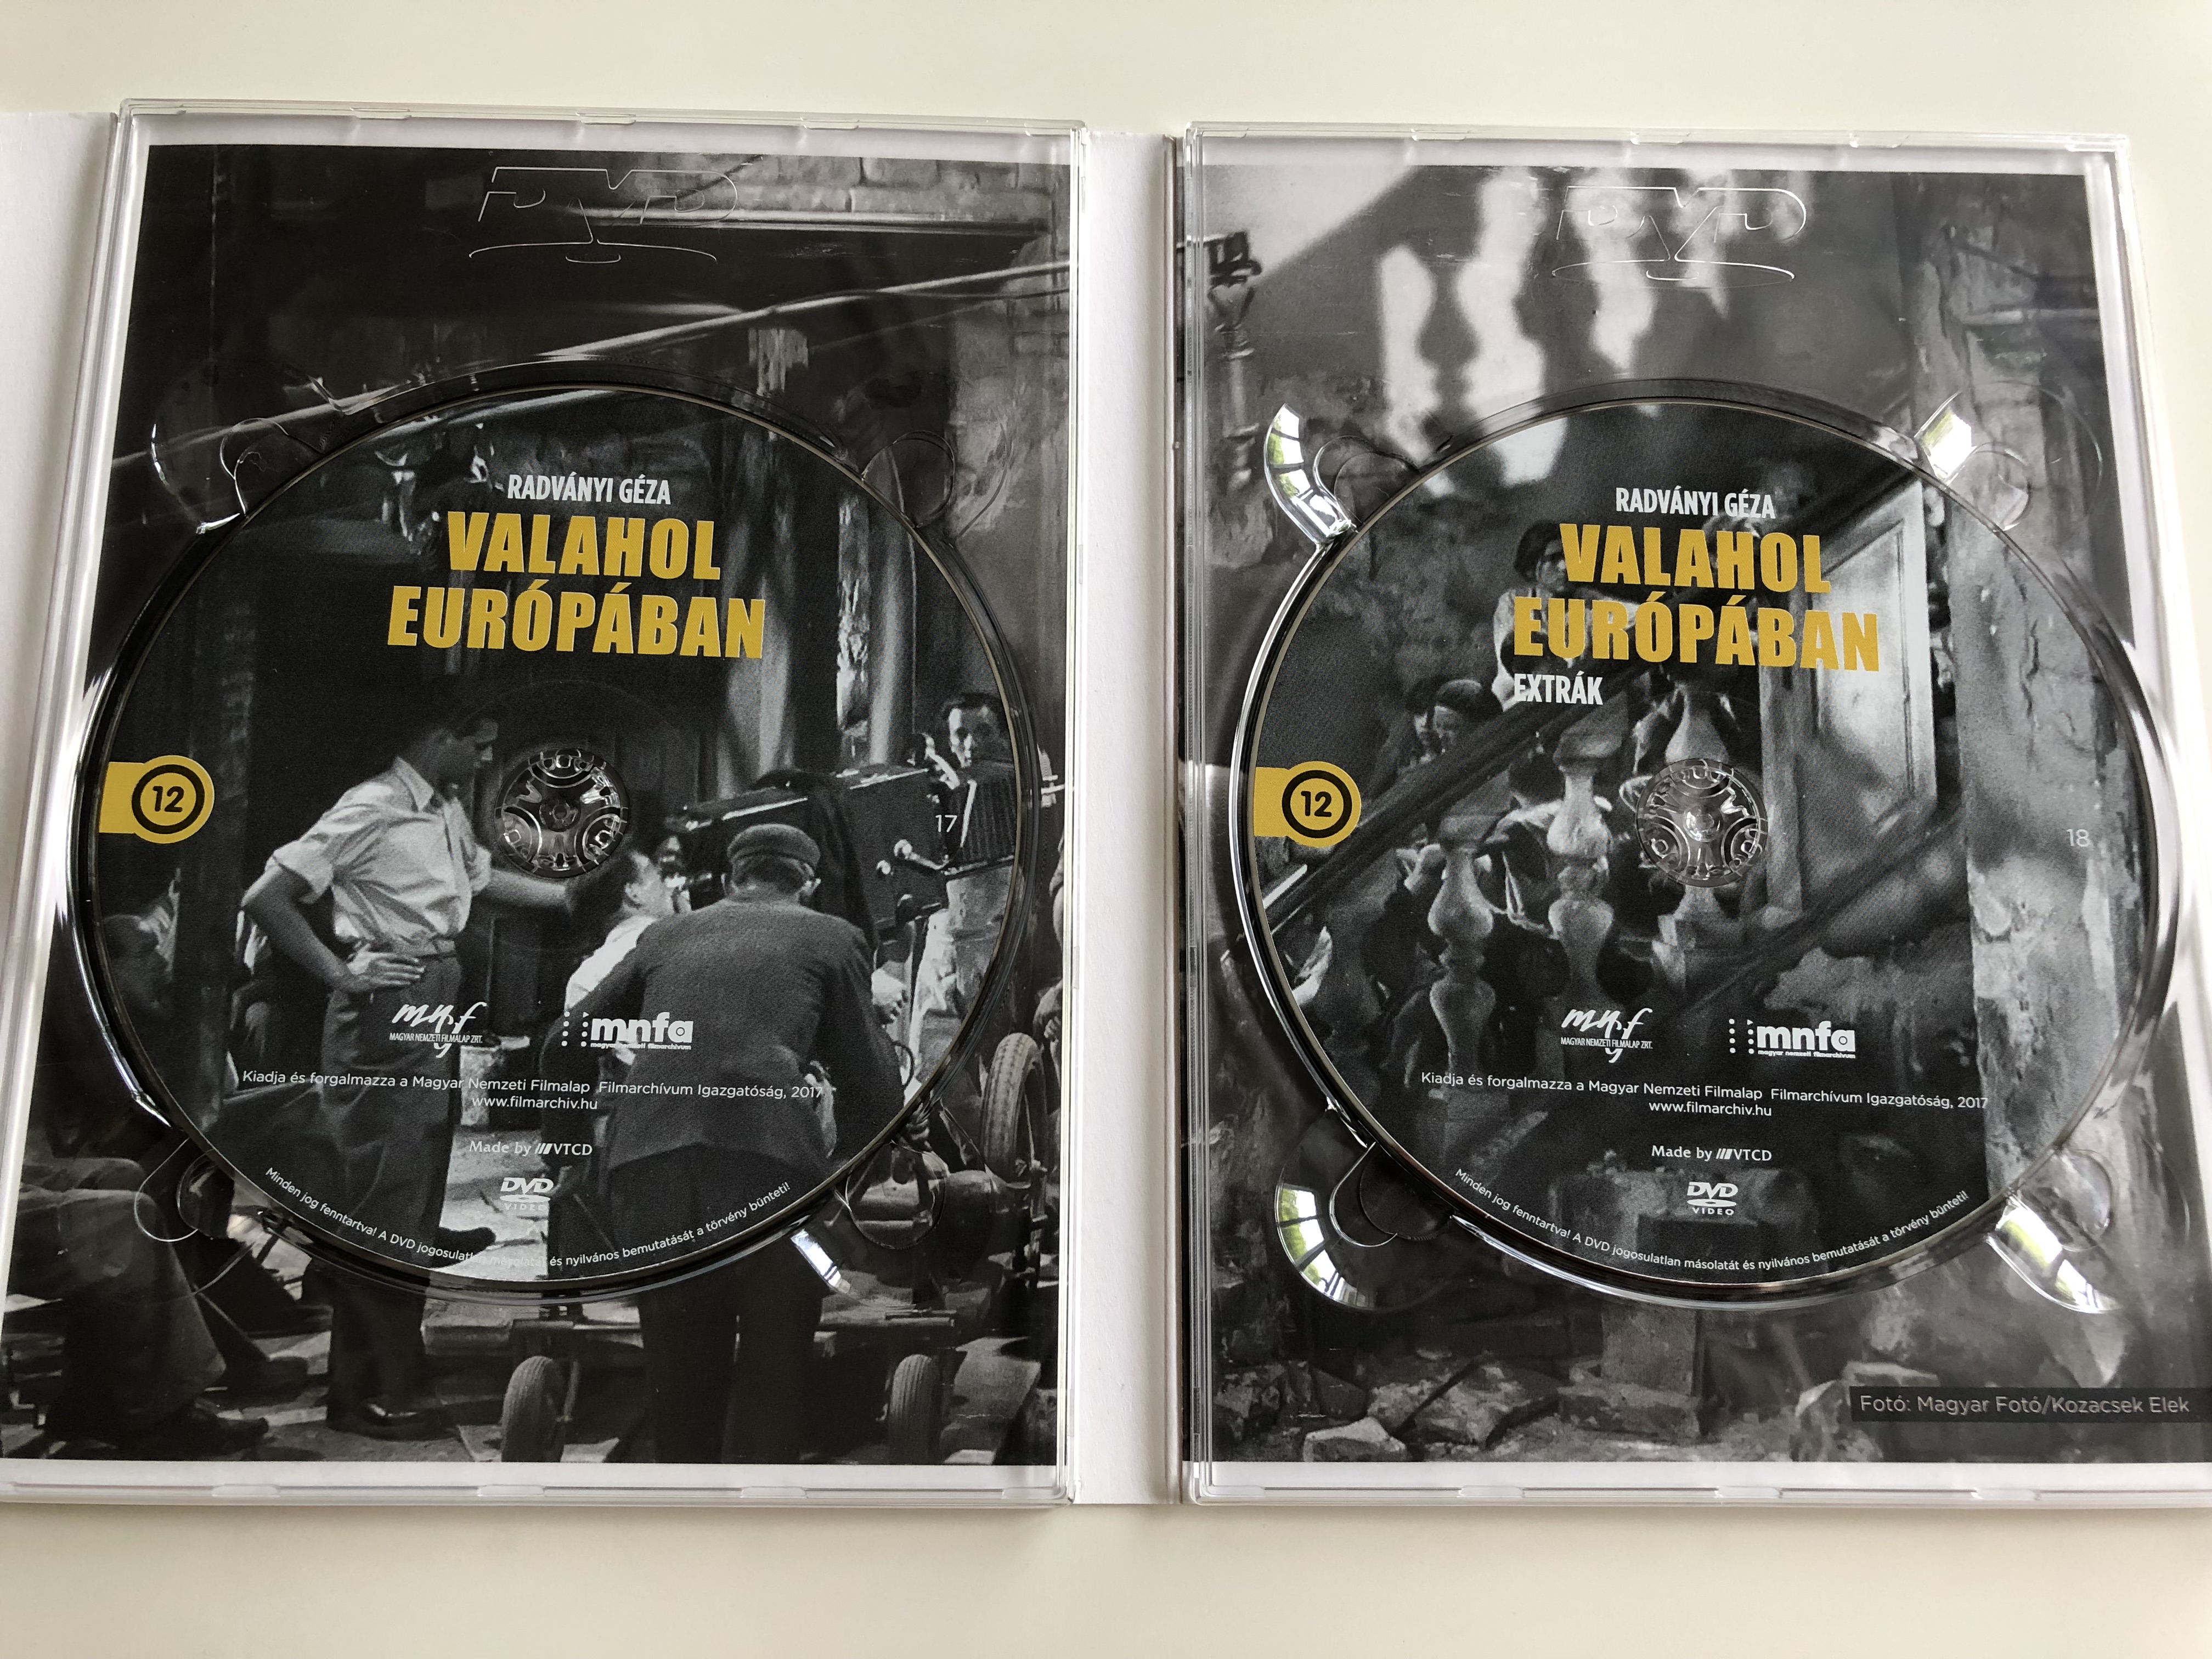 valahol-eur-p-ban-dvd-set-1947-directed-by-radv-nyi-g-za-starring-art-r-somlay-mikl-s-g-bor-extra-collector-s-edition-2-dvd-biography-of-g-za-radv-nyi-behind-the-scenes-of-restoring-the-film-3-.jpg